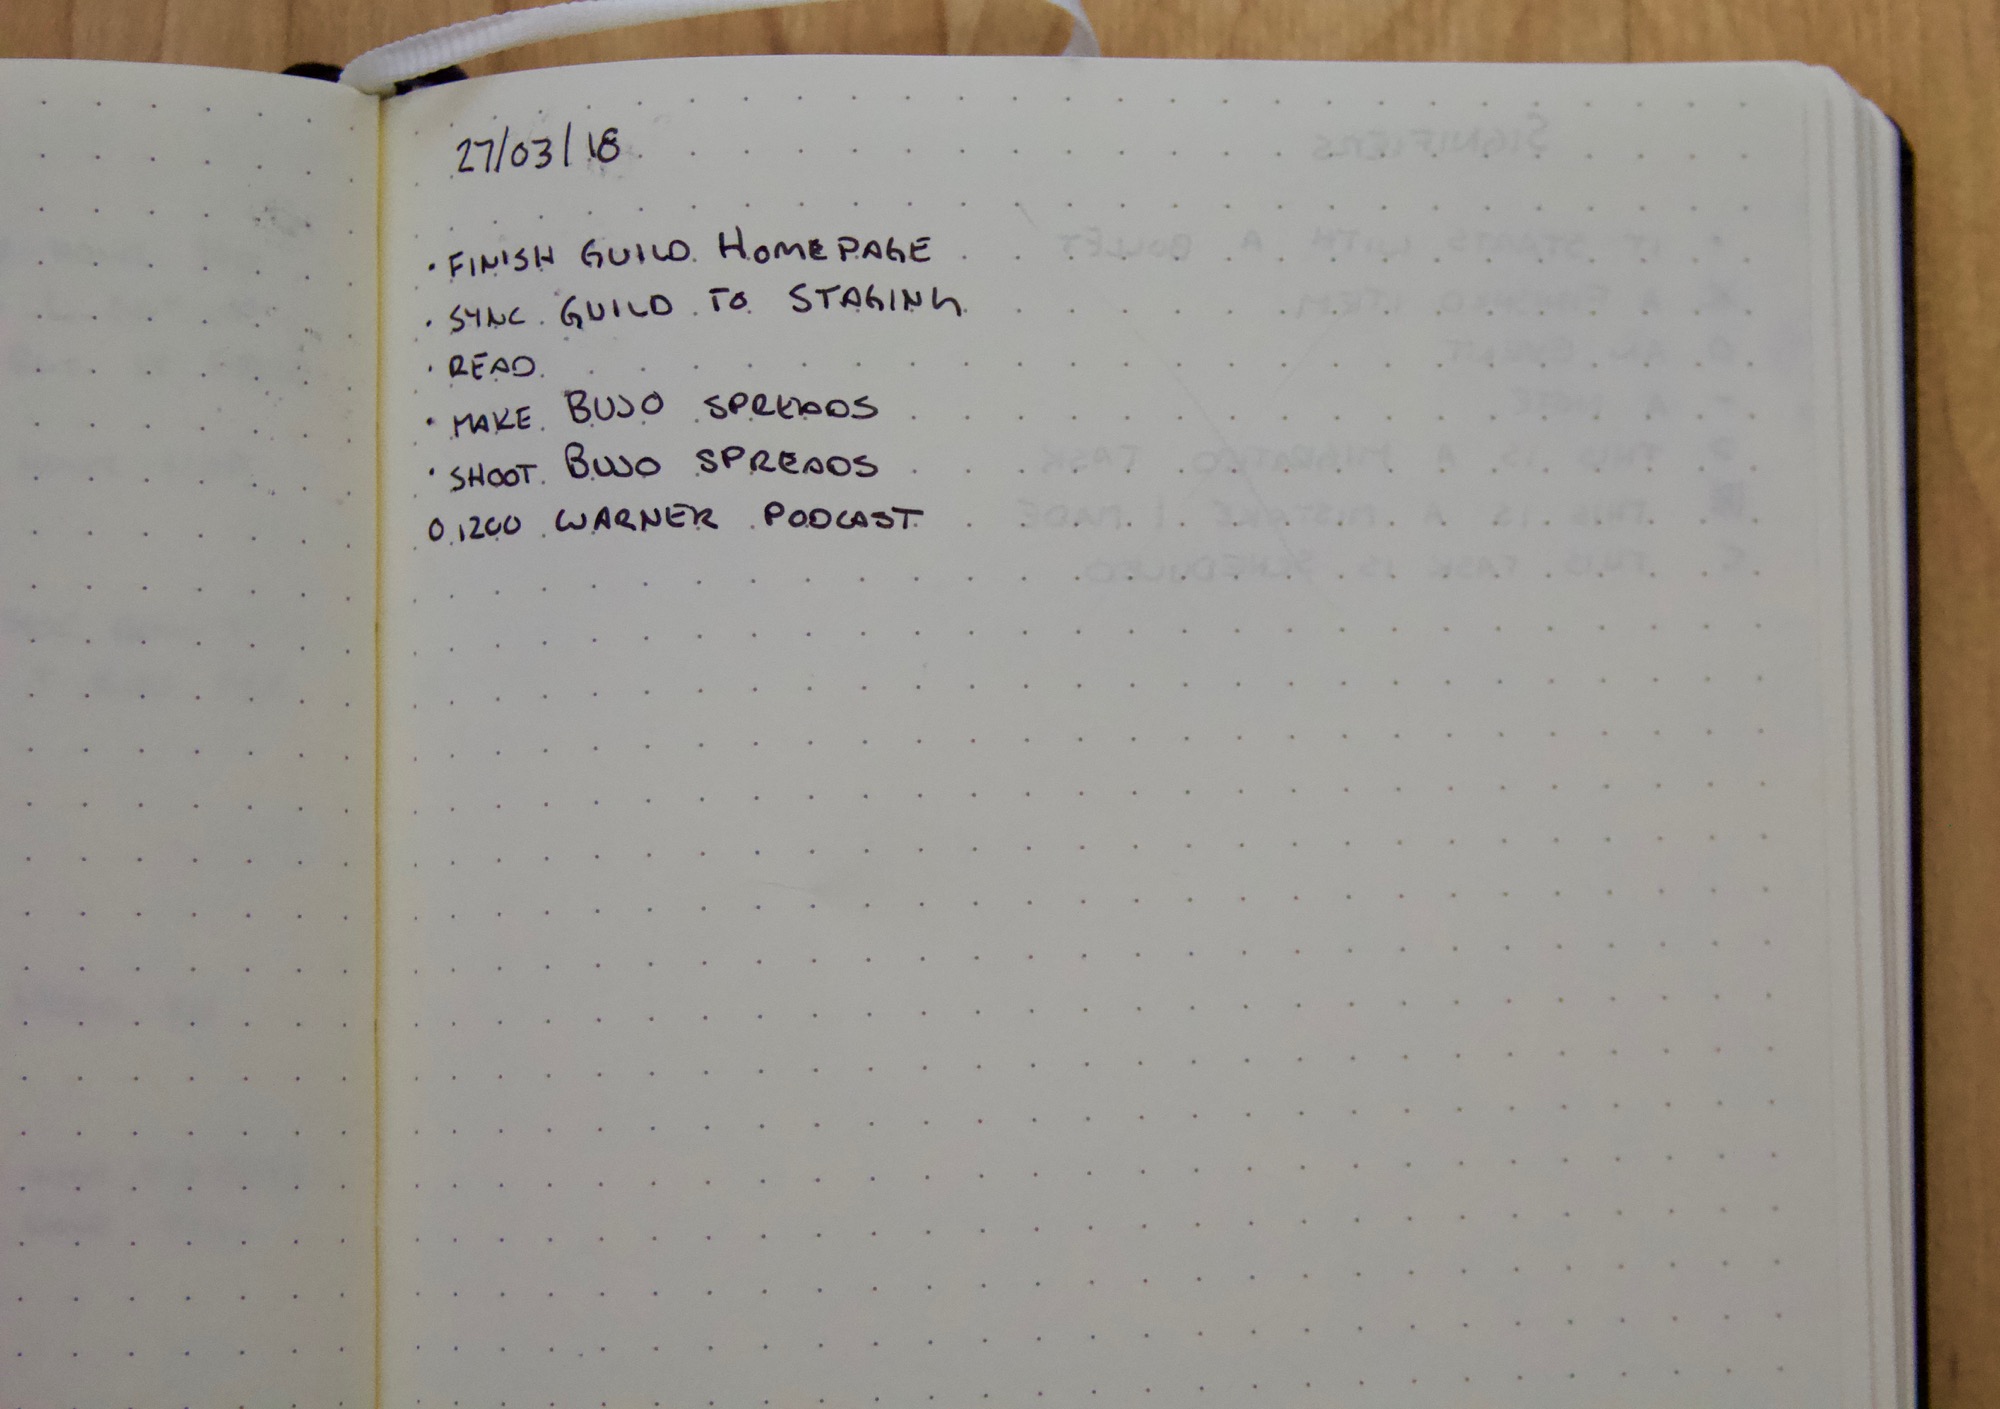 Daily Log in The Bullet Journal System